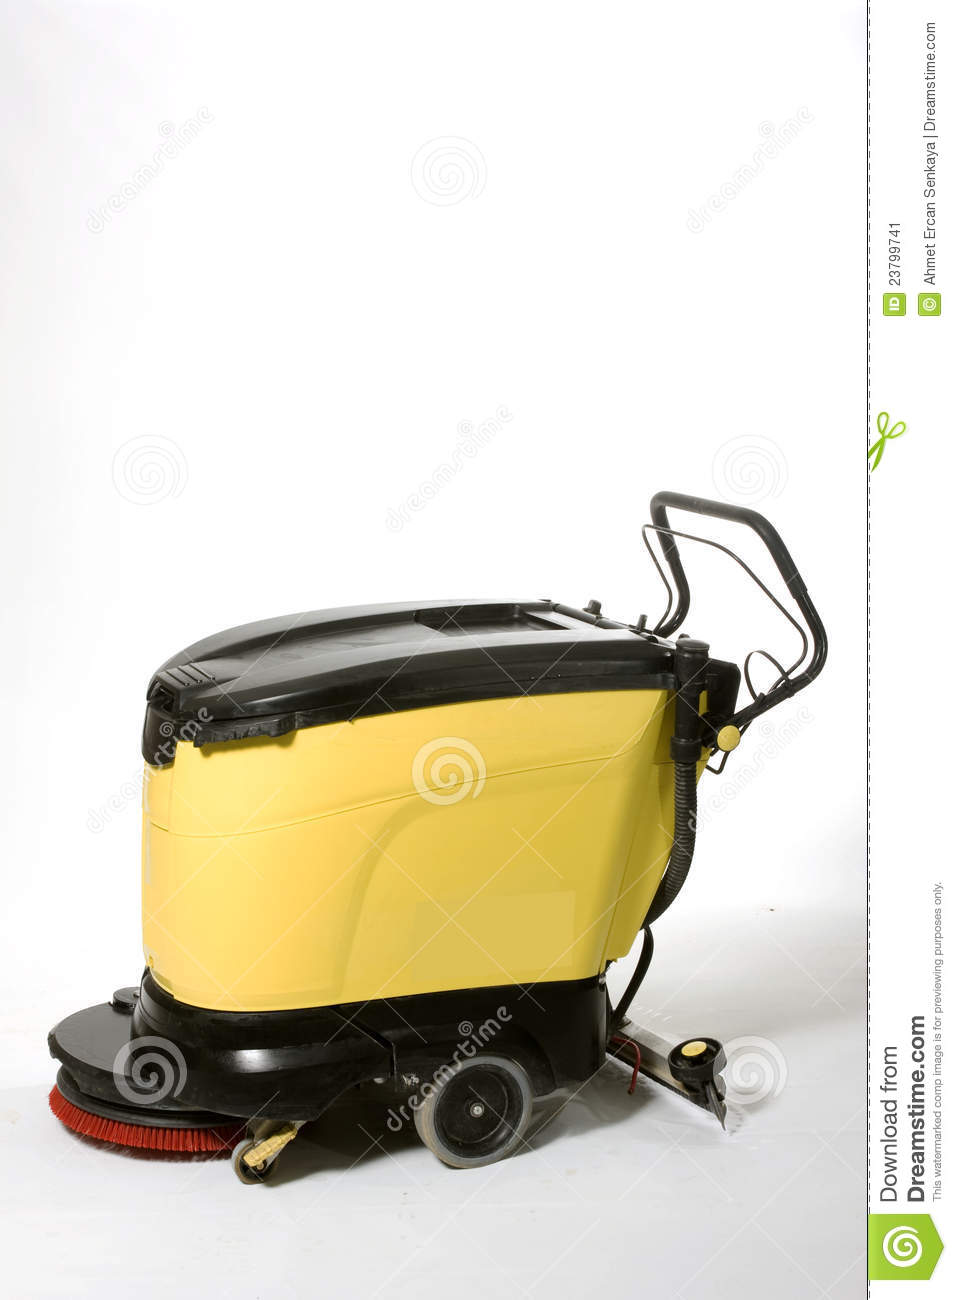 Cleaning Equipment Clipart Floor Cleaning Machine